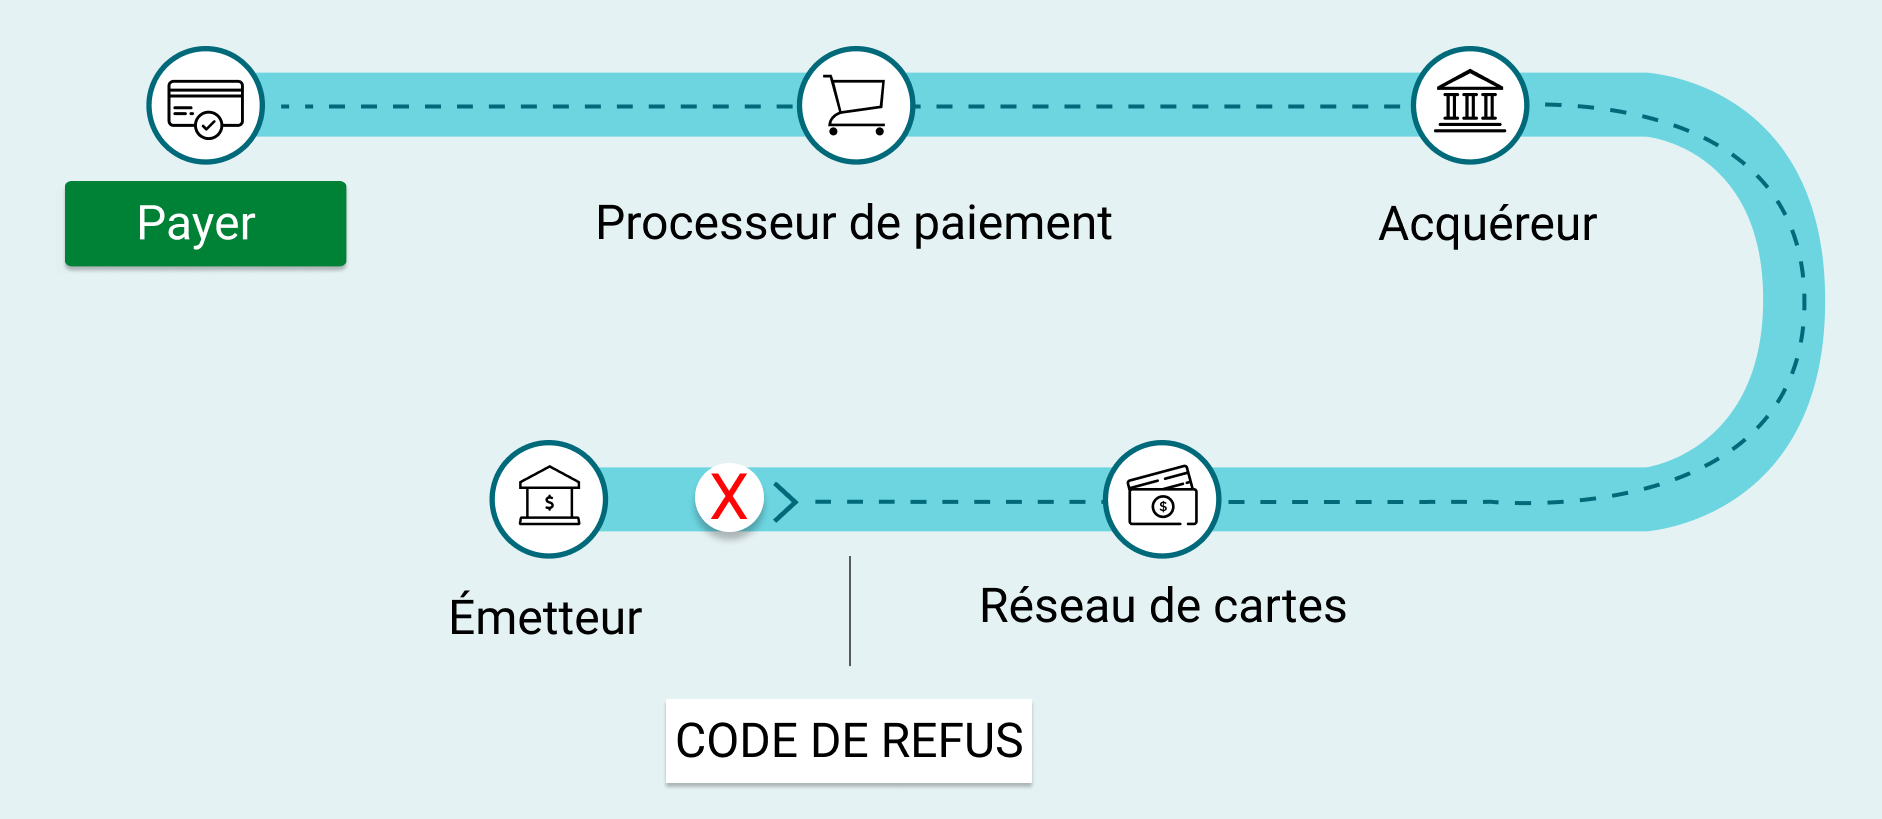 Decline code in the transaction flow